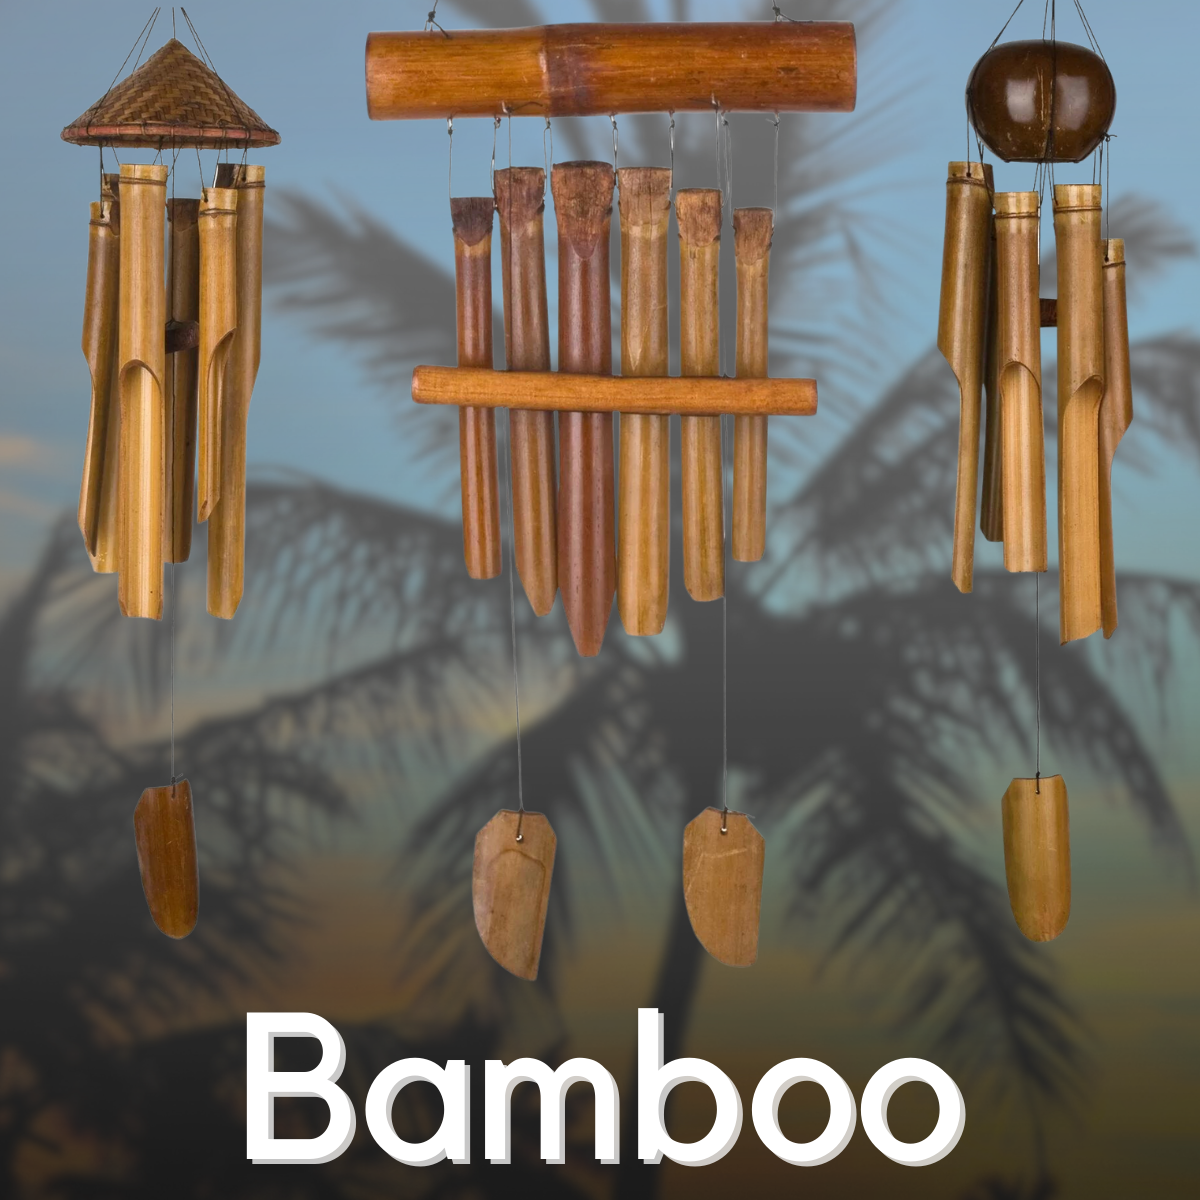 Shop Quality Bamboo Wind Chimes - Indoor & Outdoor Decor